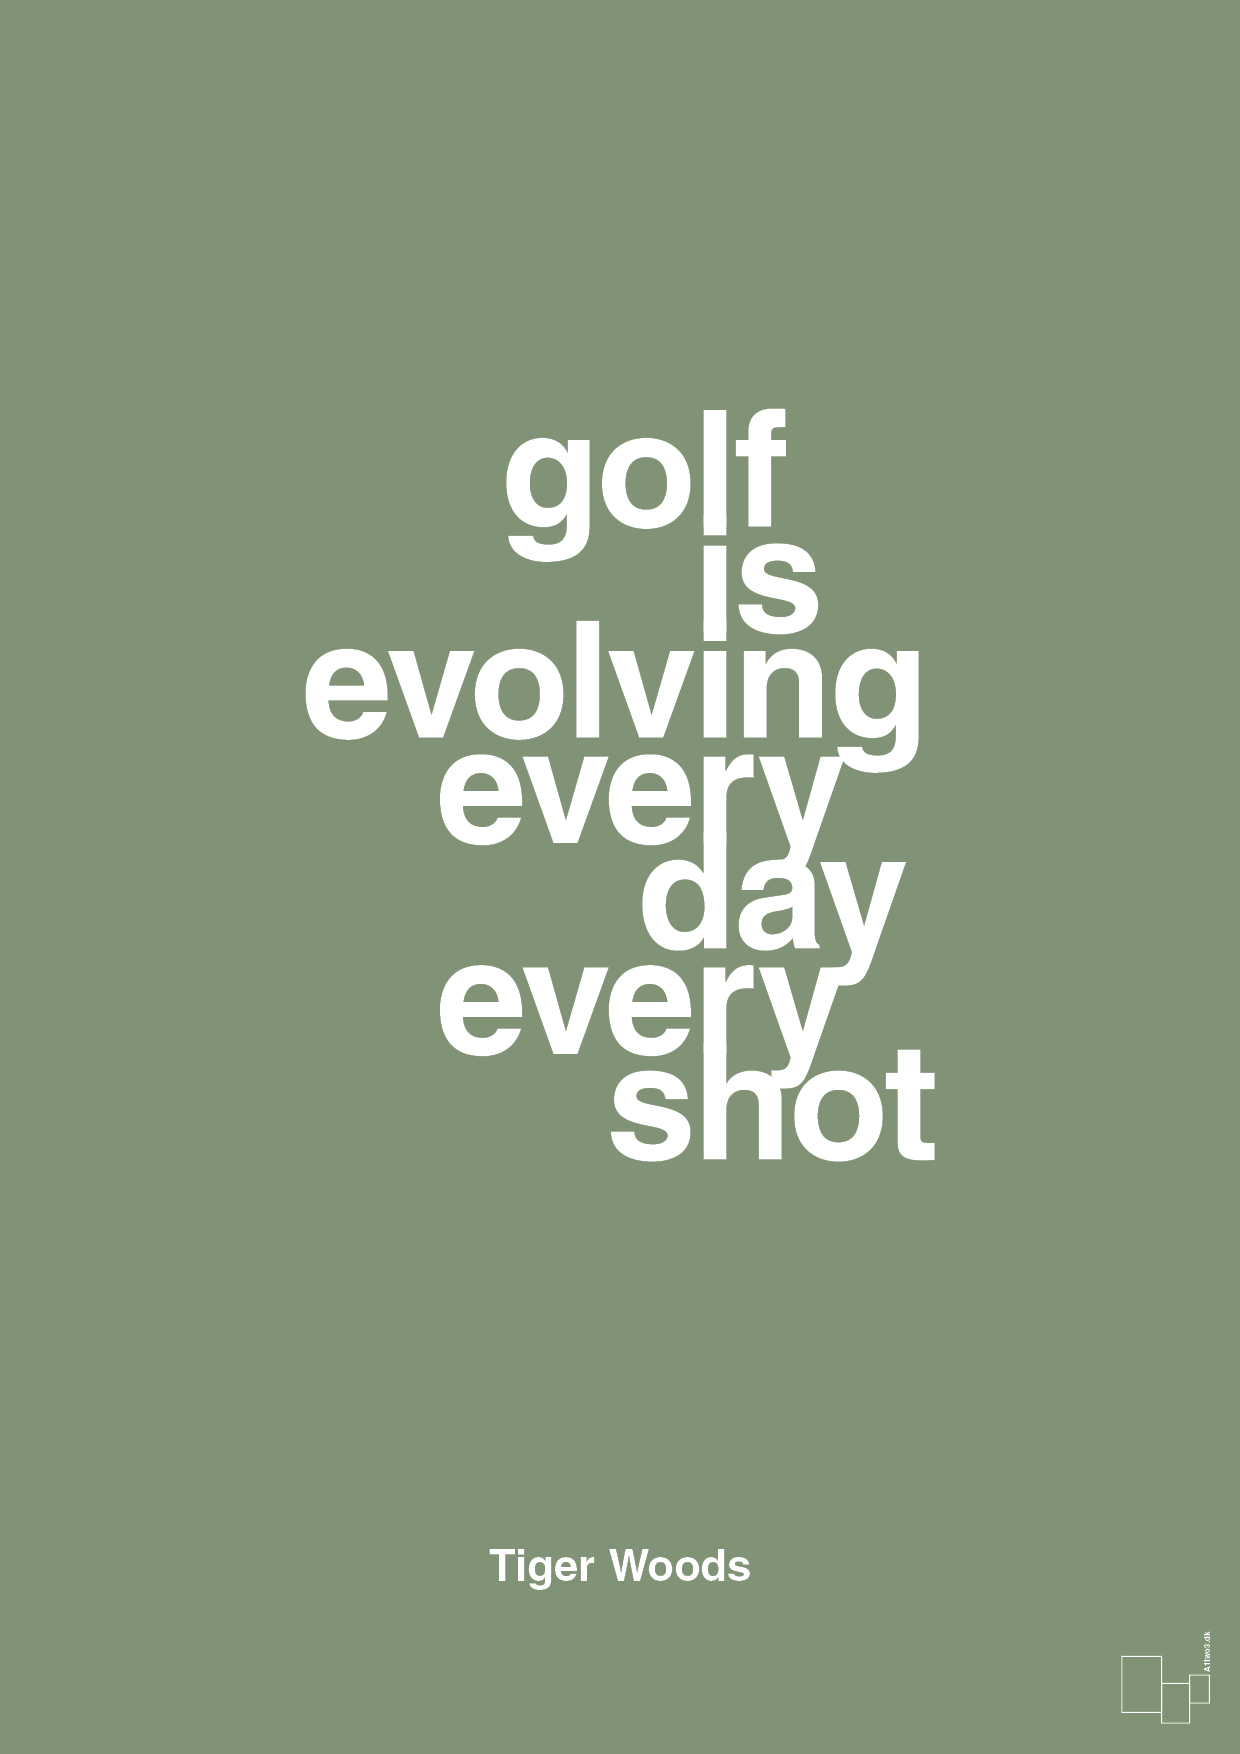 golf is evolving every day every shot - Plakat med Citater i Jade